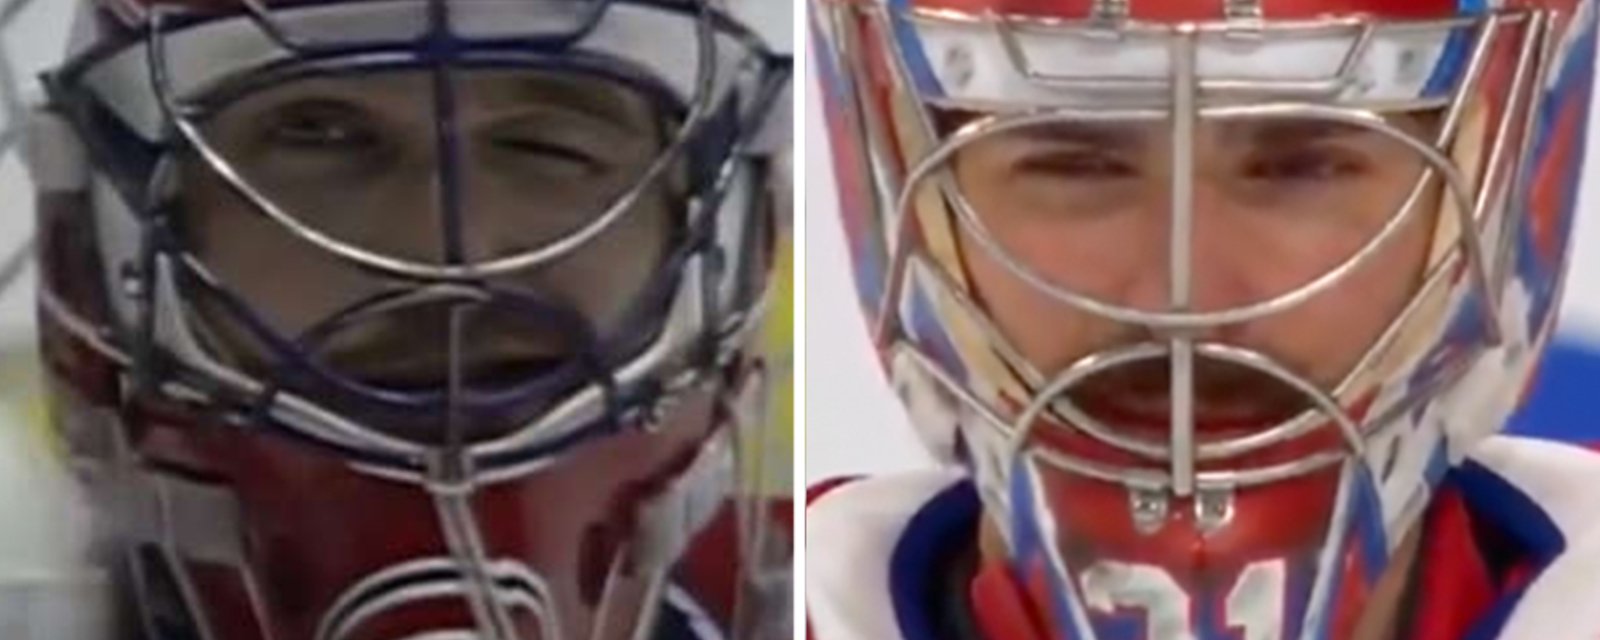 Carey Price channels Patrick Roy, gives Mark Stone a wink and a smile after incredible save